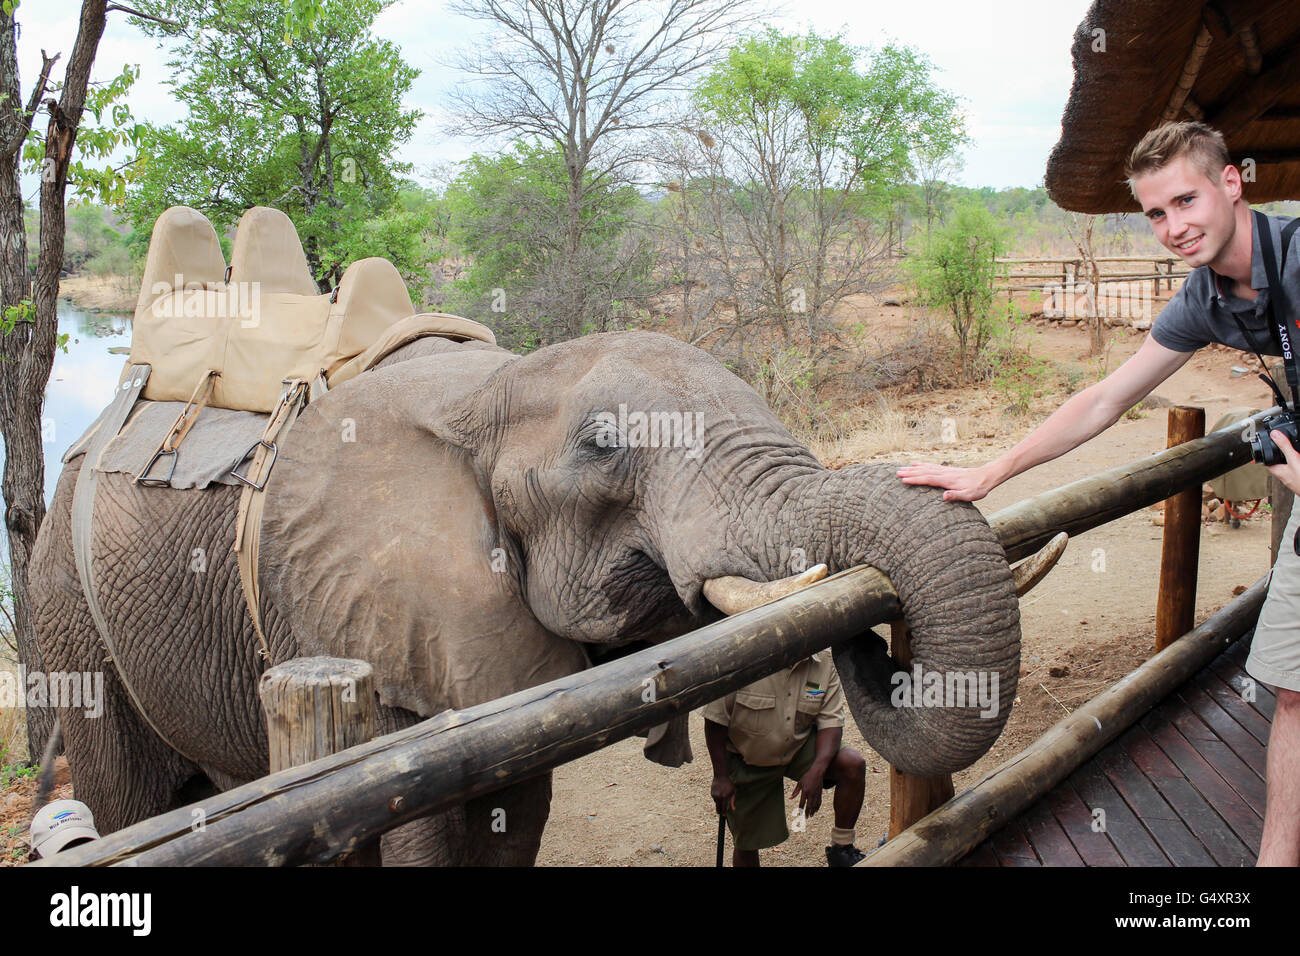 Zimbabwe, Matabeleland North, Hwange, Victoria Falls National Park, Victoria Falls, Elephant Safari, the elephant can be caressed by young tourists Stock Photo